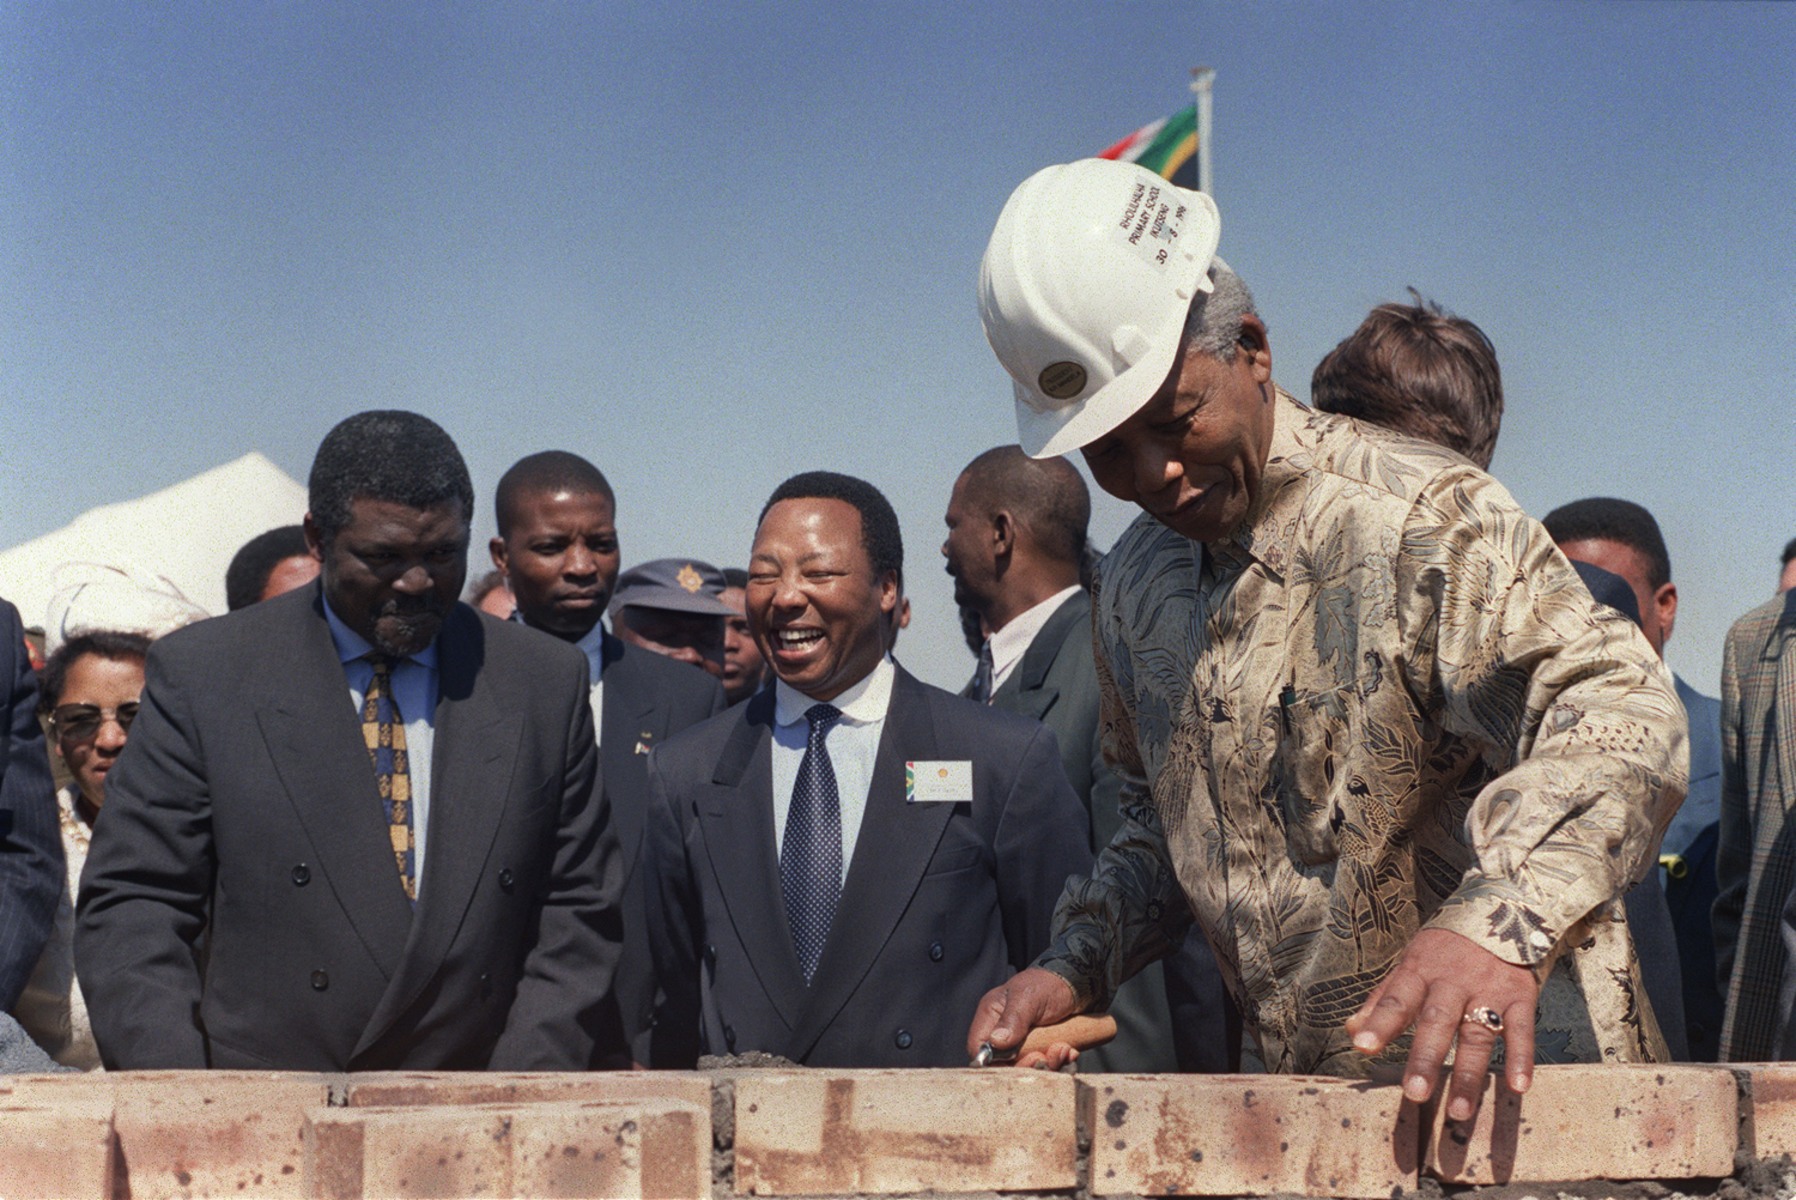 Nelson Mandela legacy includes lasting mark on pop culture - TODAY.com1500 x 1002